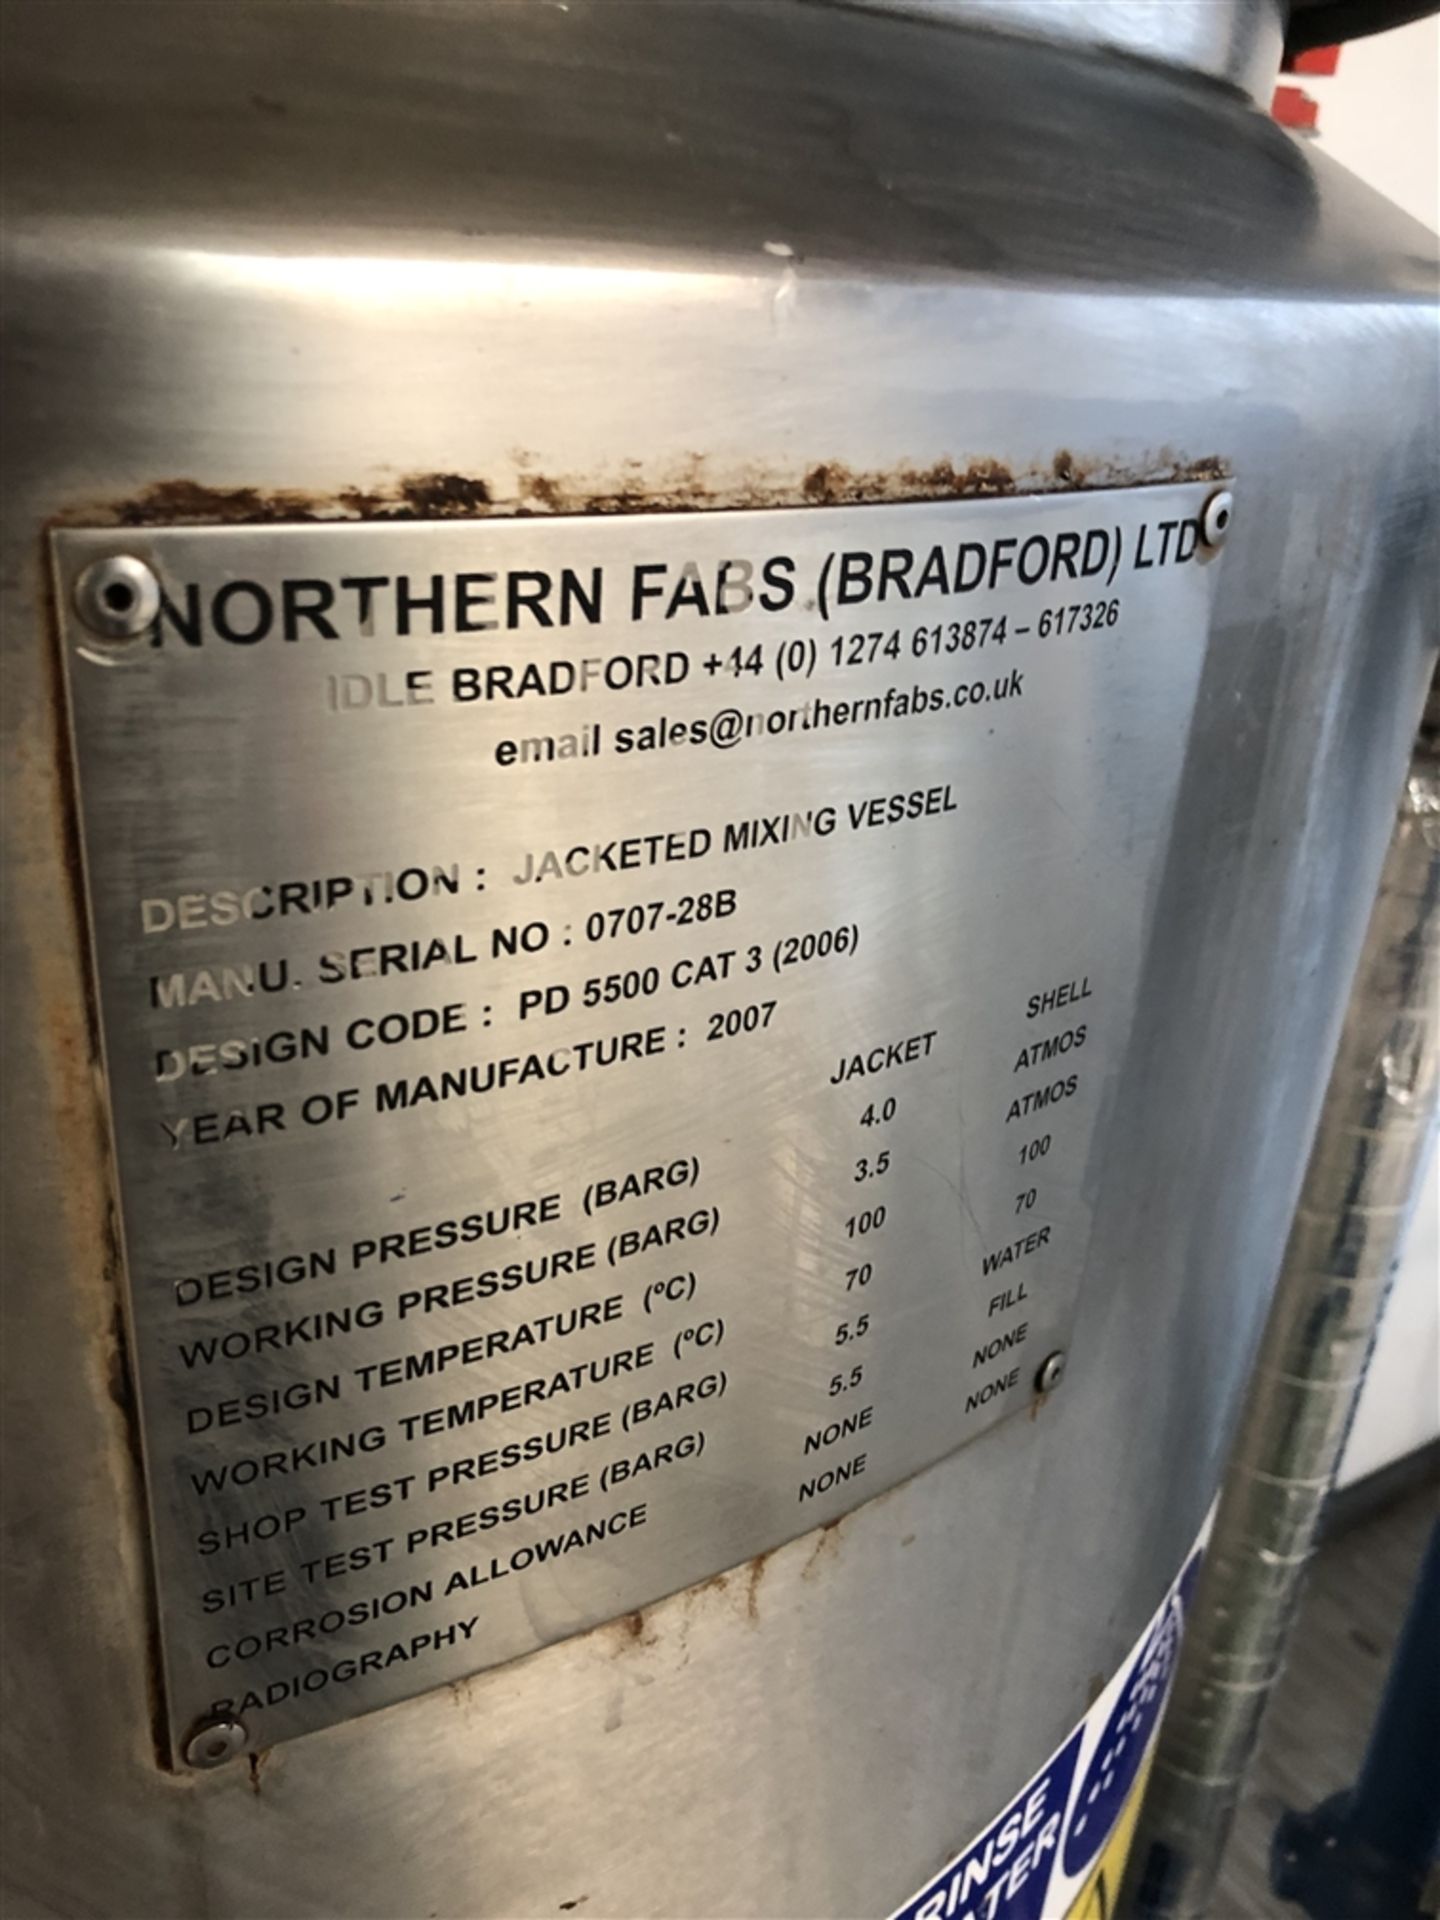 2007 Northern Fabs 300 Litre jacketed mixing vesse - Image 2 of 3